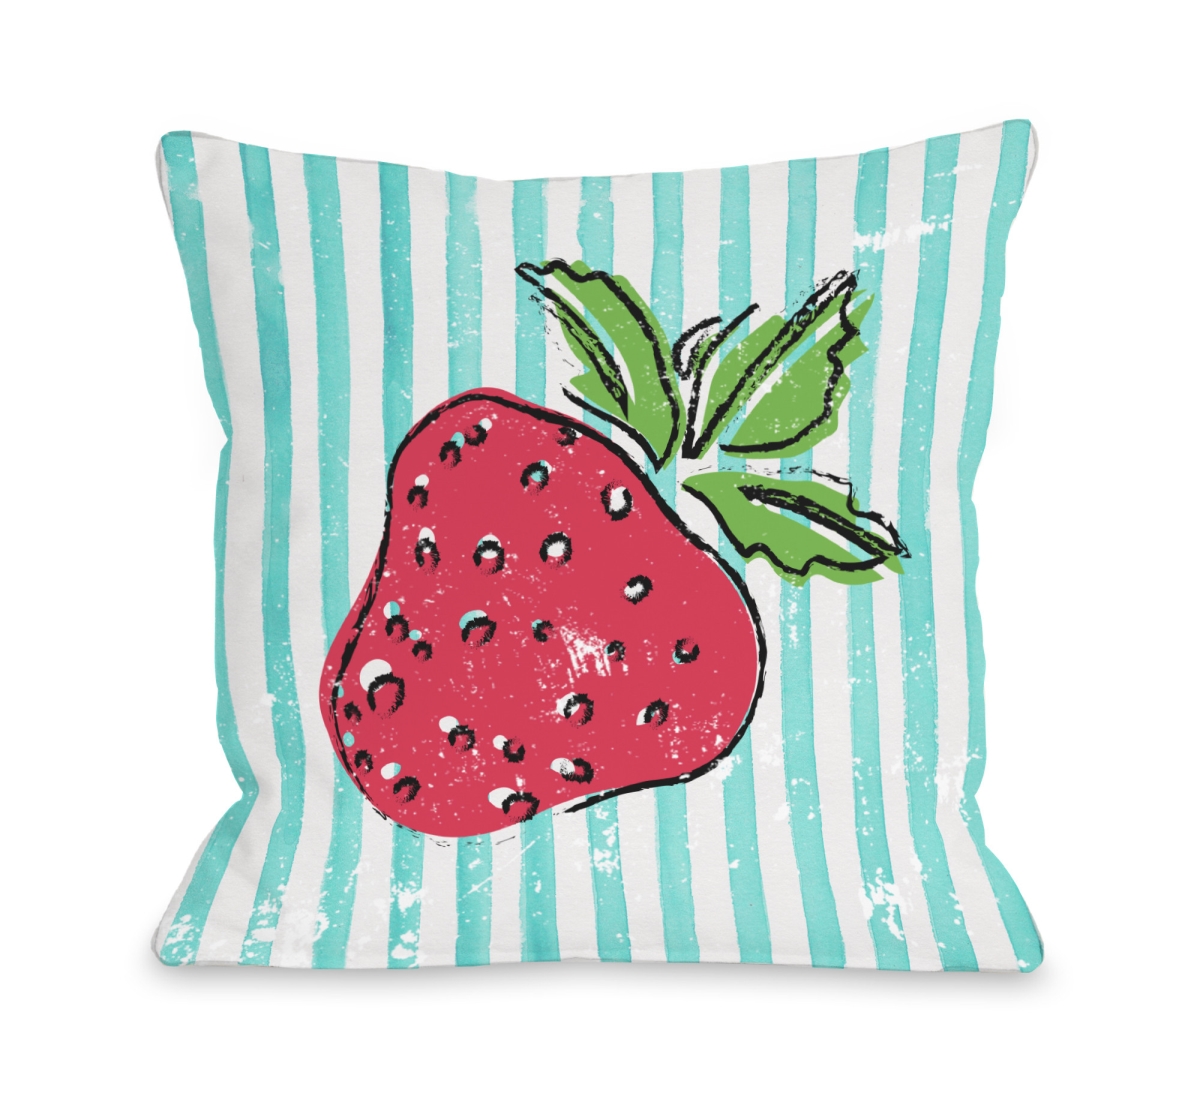 16 X 16 In. Strawbooty Pillow, Teal & Multicolor